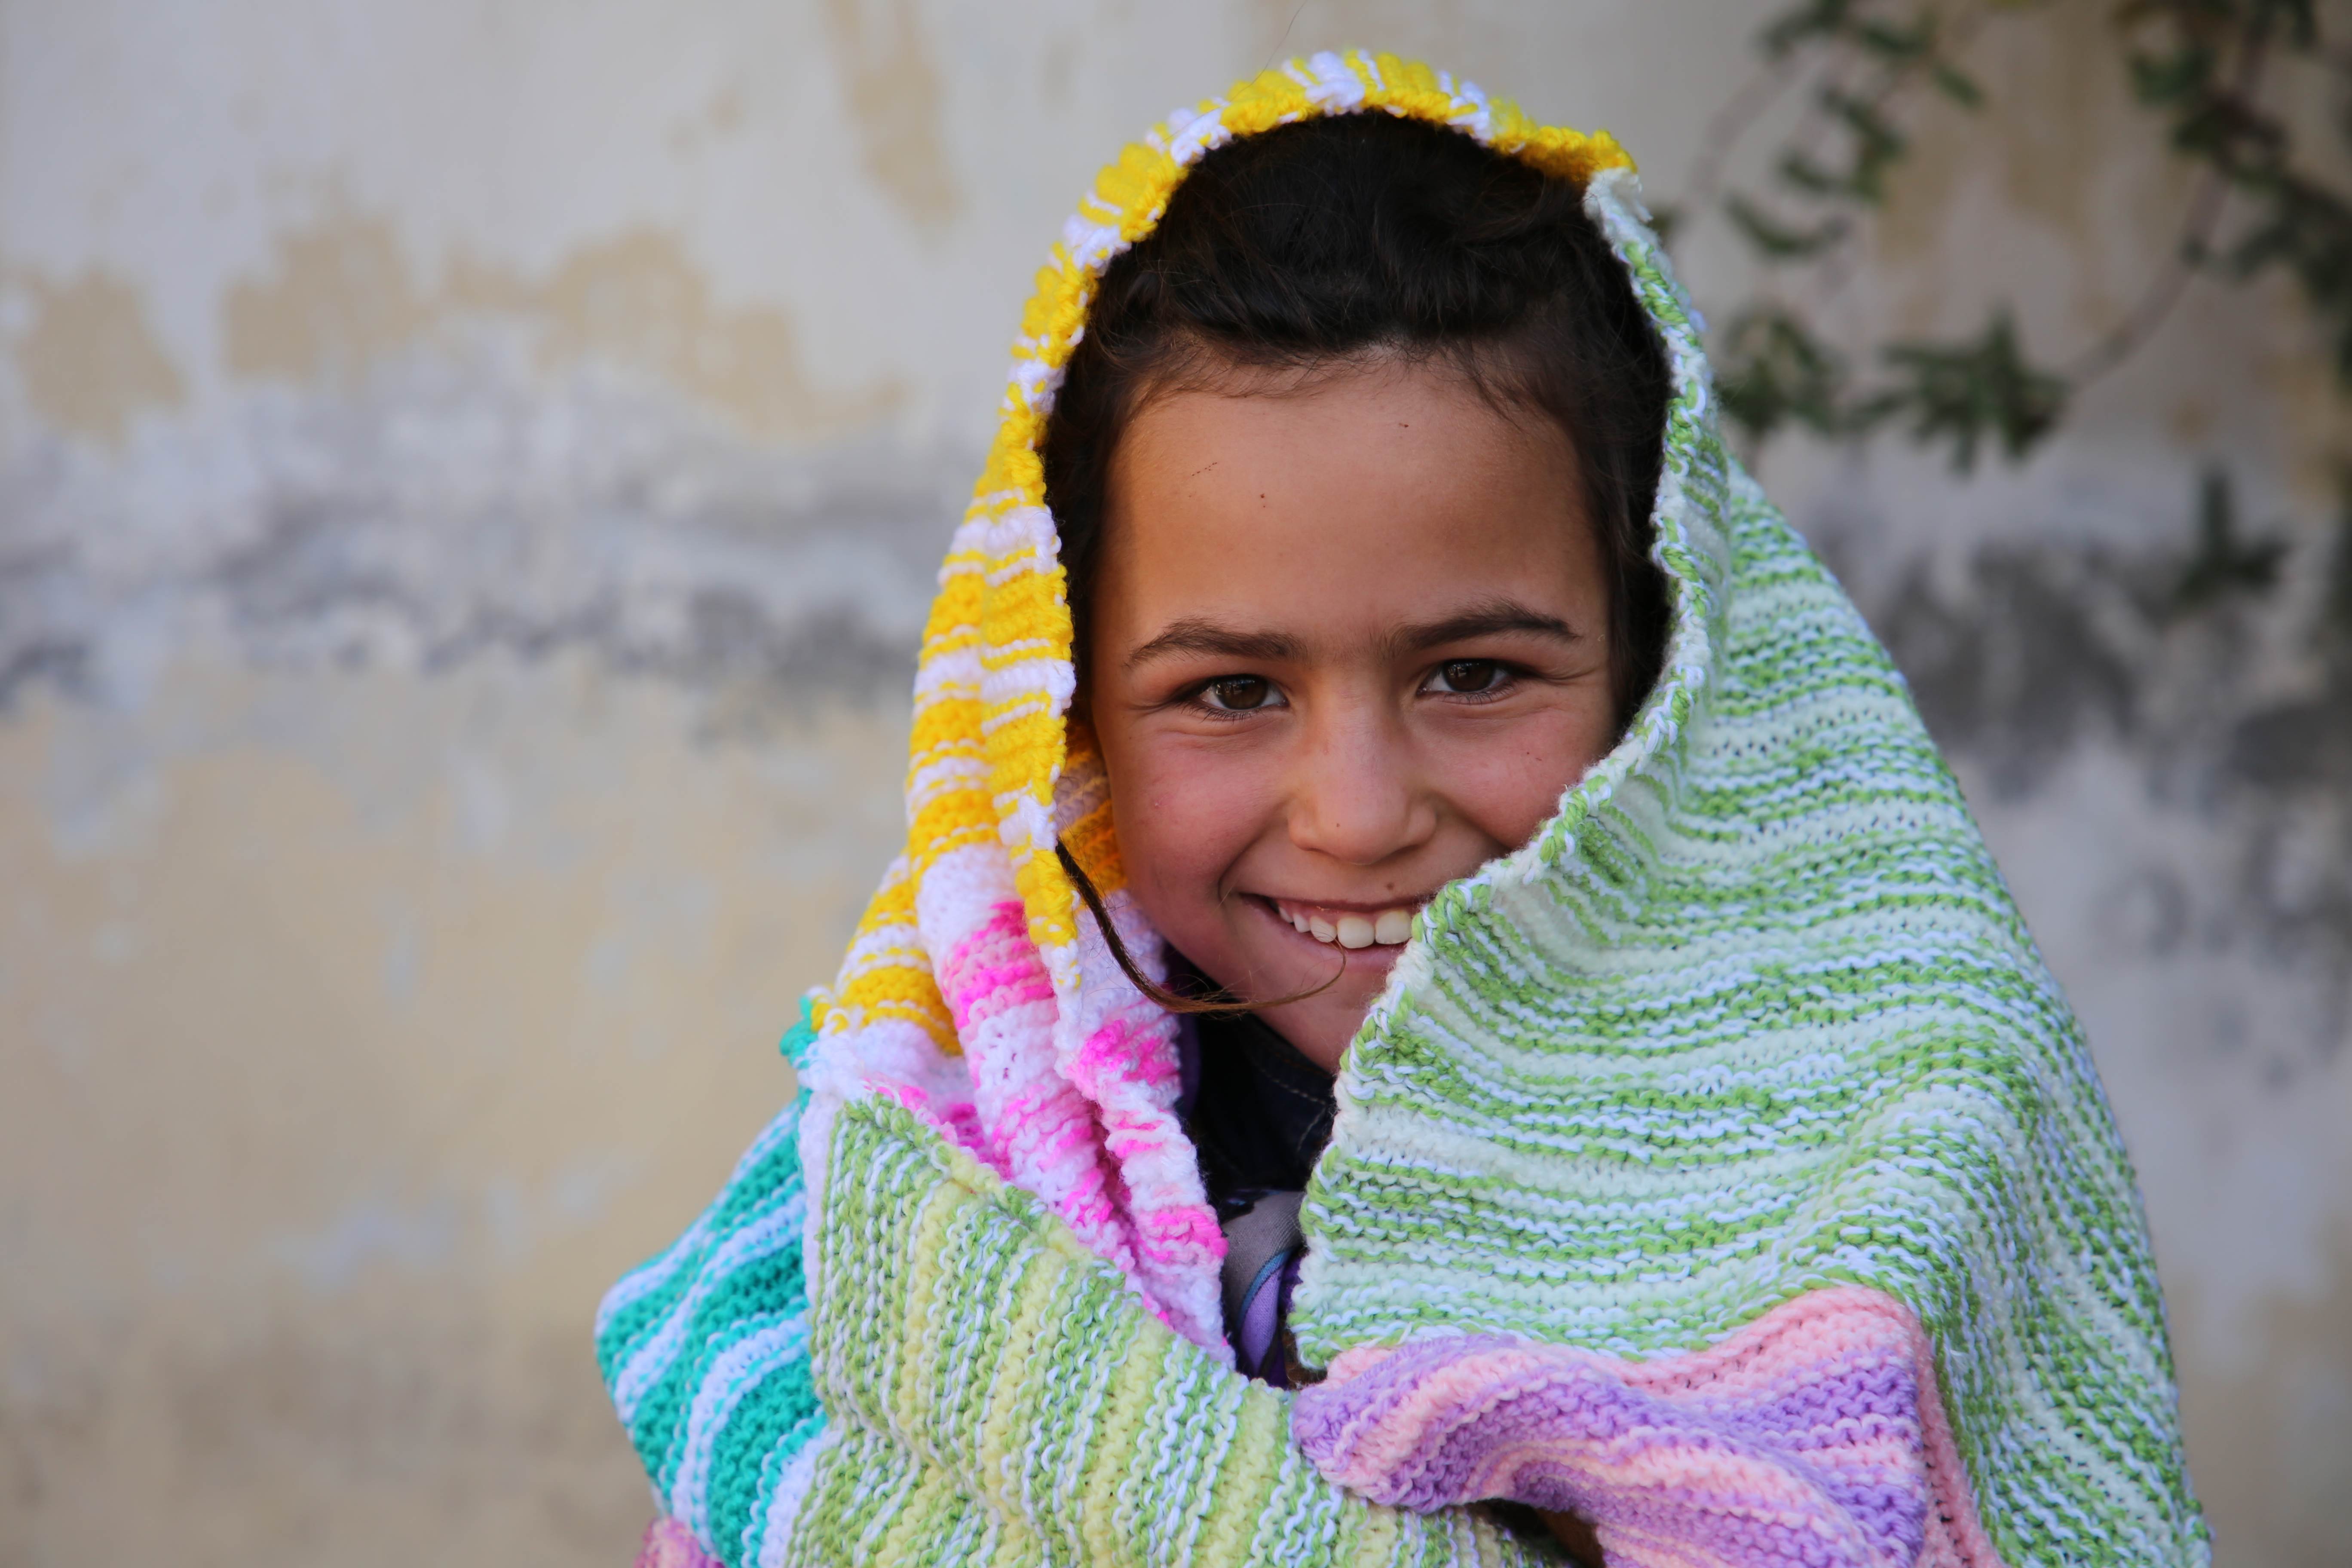 9-year-old Sarah grins with her World Vision blanket wrapped around her